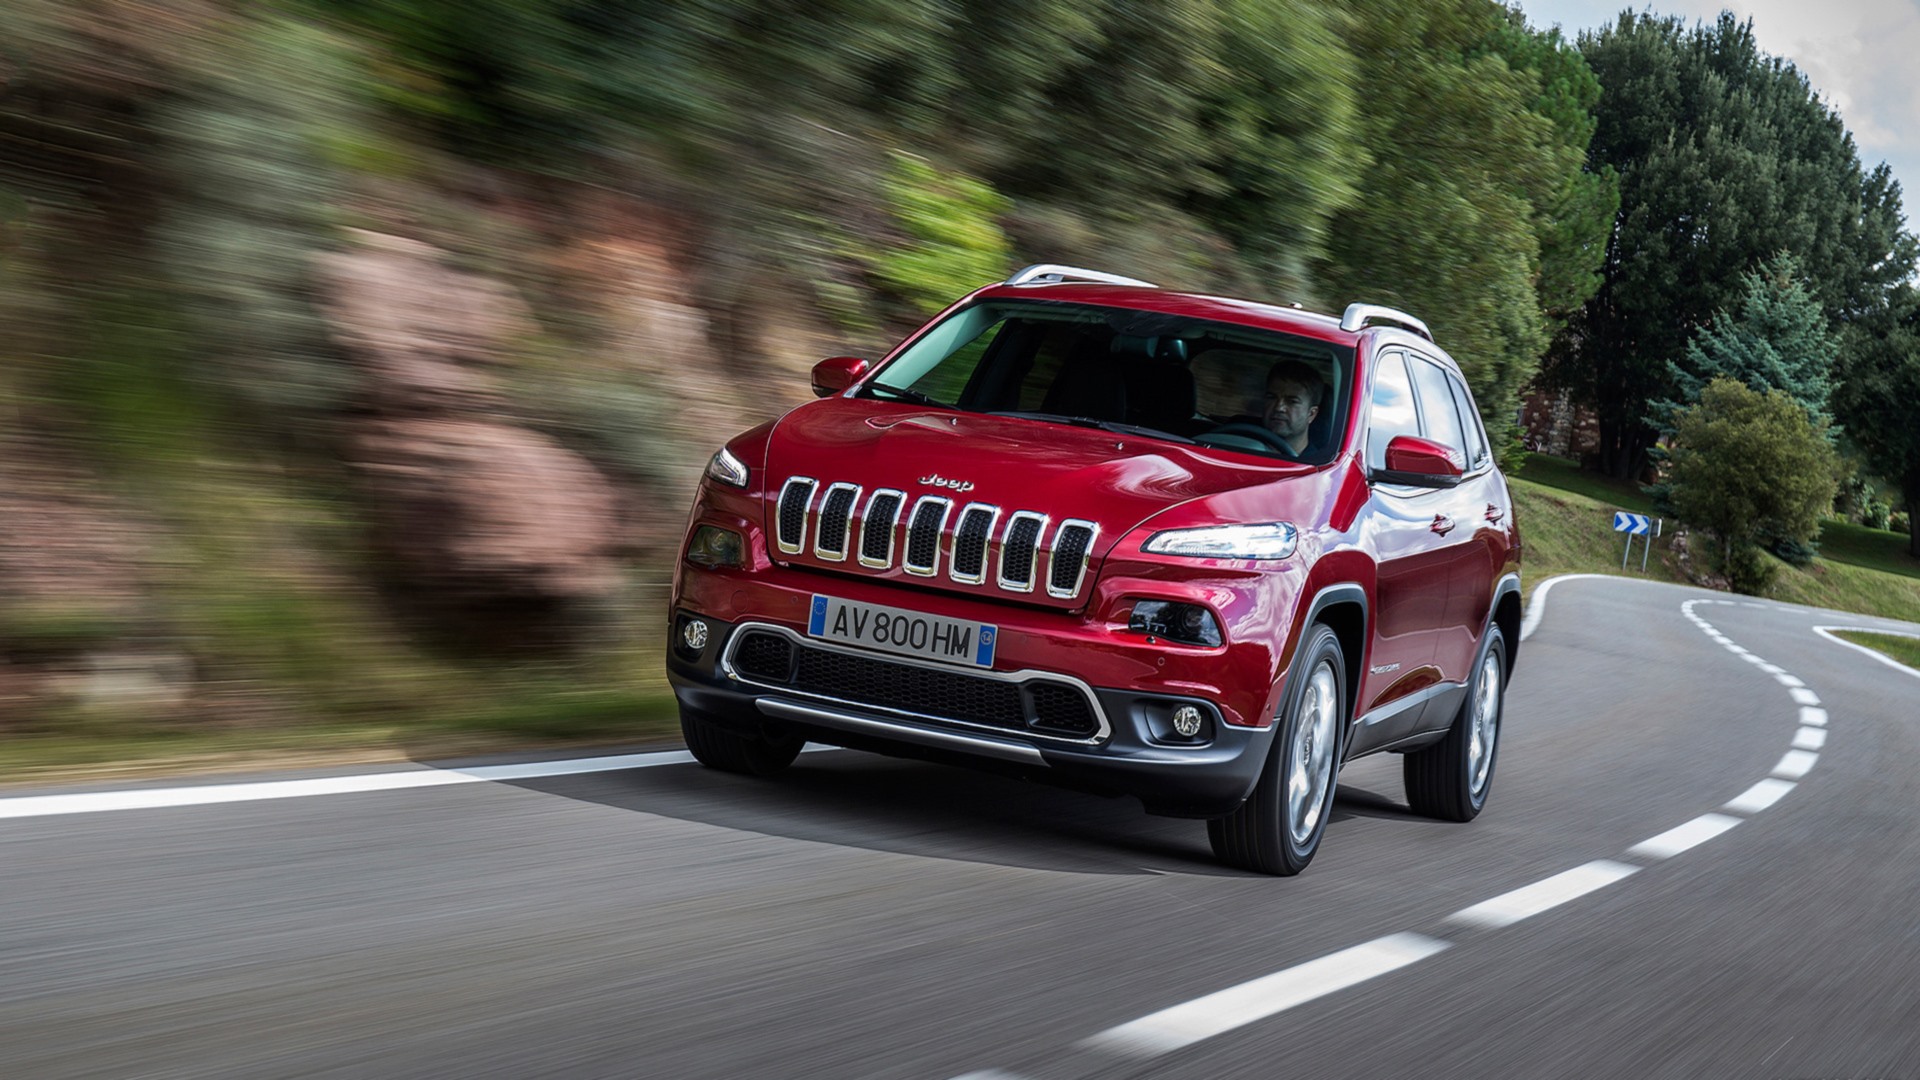 Vehicles Jeep Cherokee HD Wallpaper | Background Image